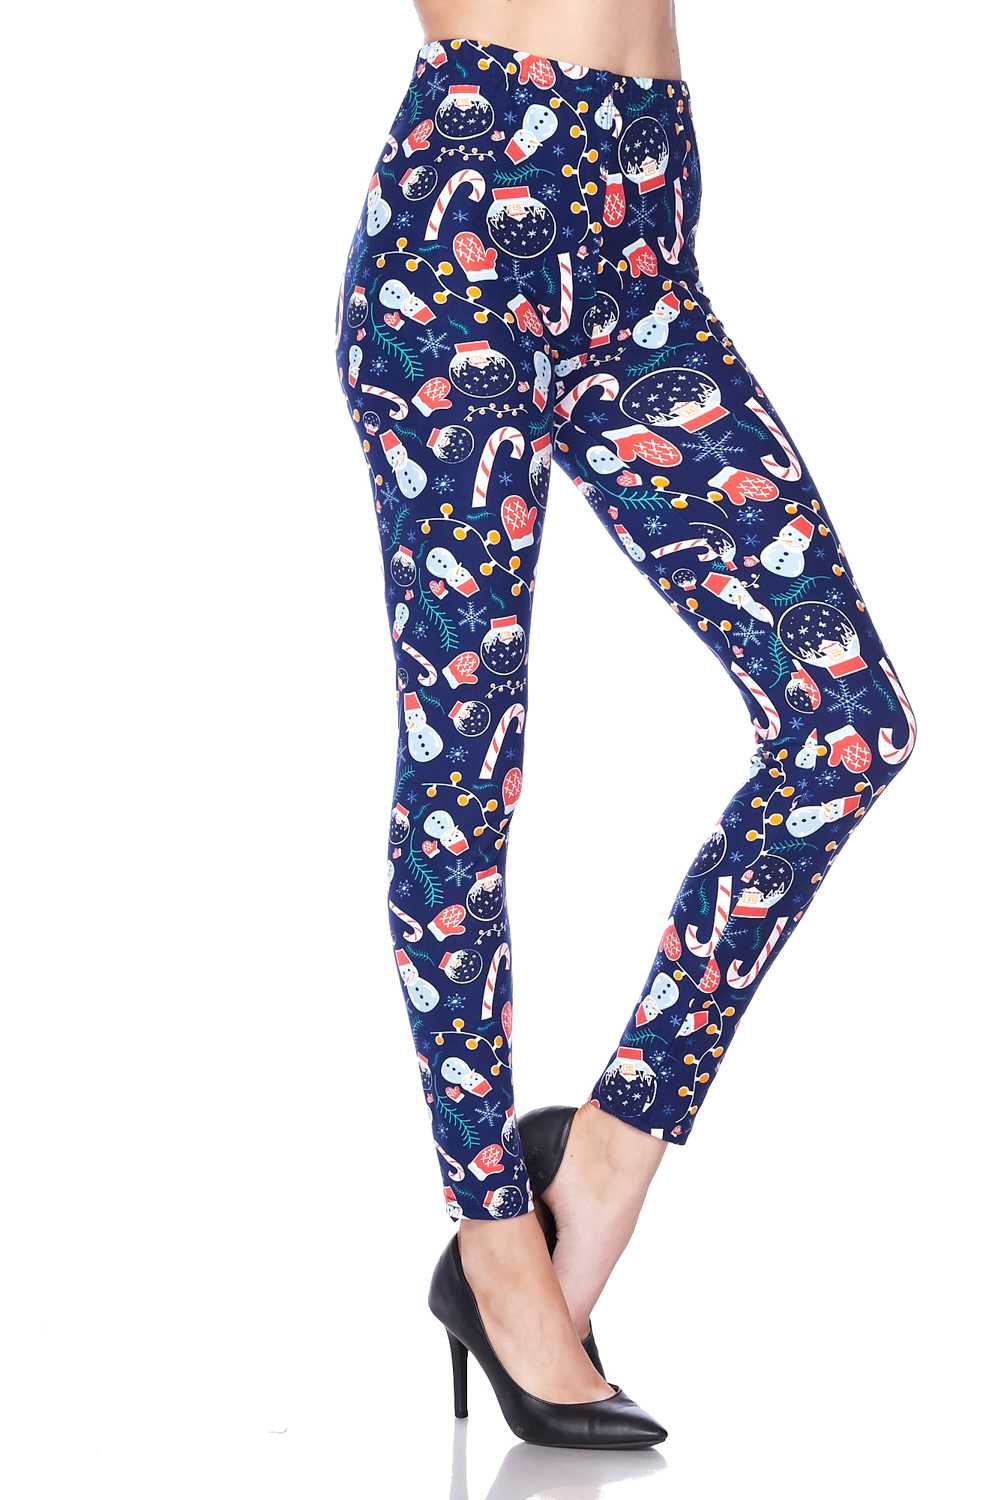 Warm on a Cold Night Print Brushed Leggings